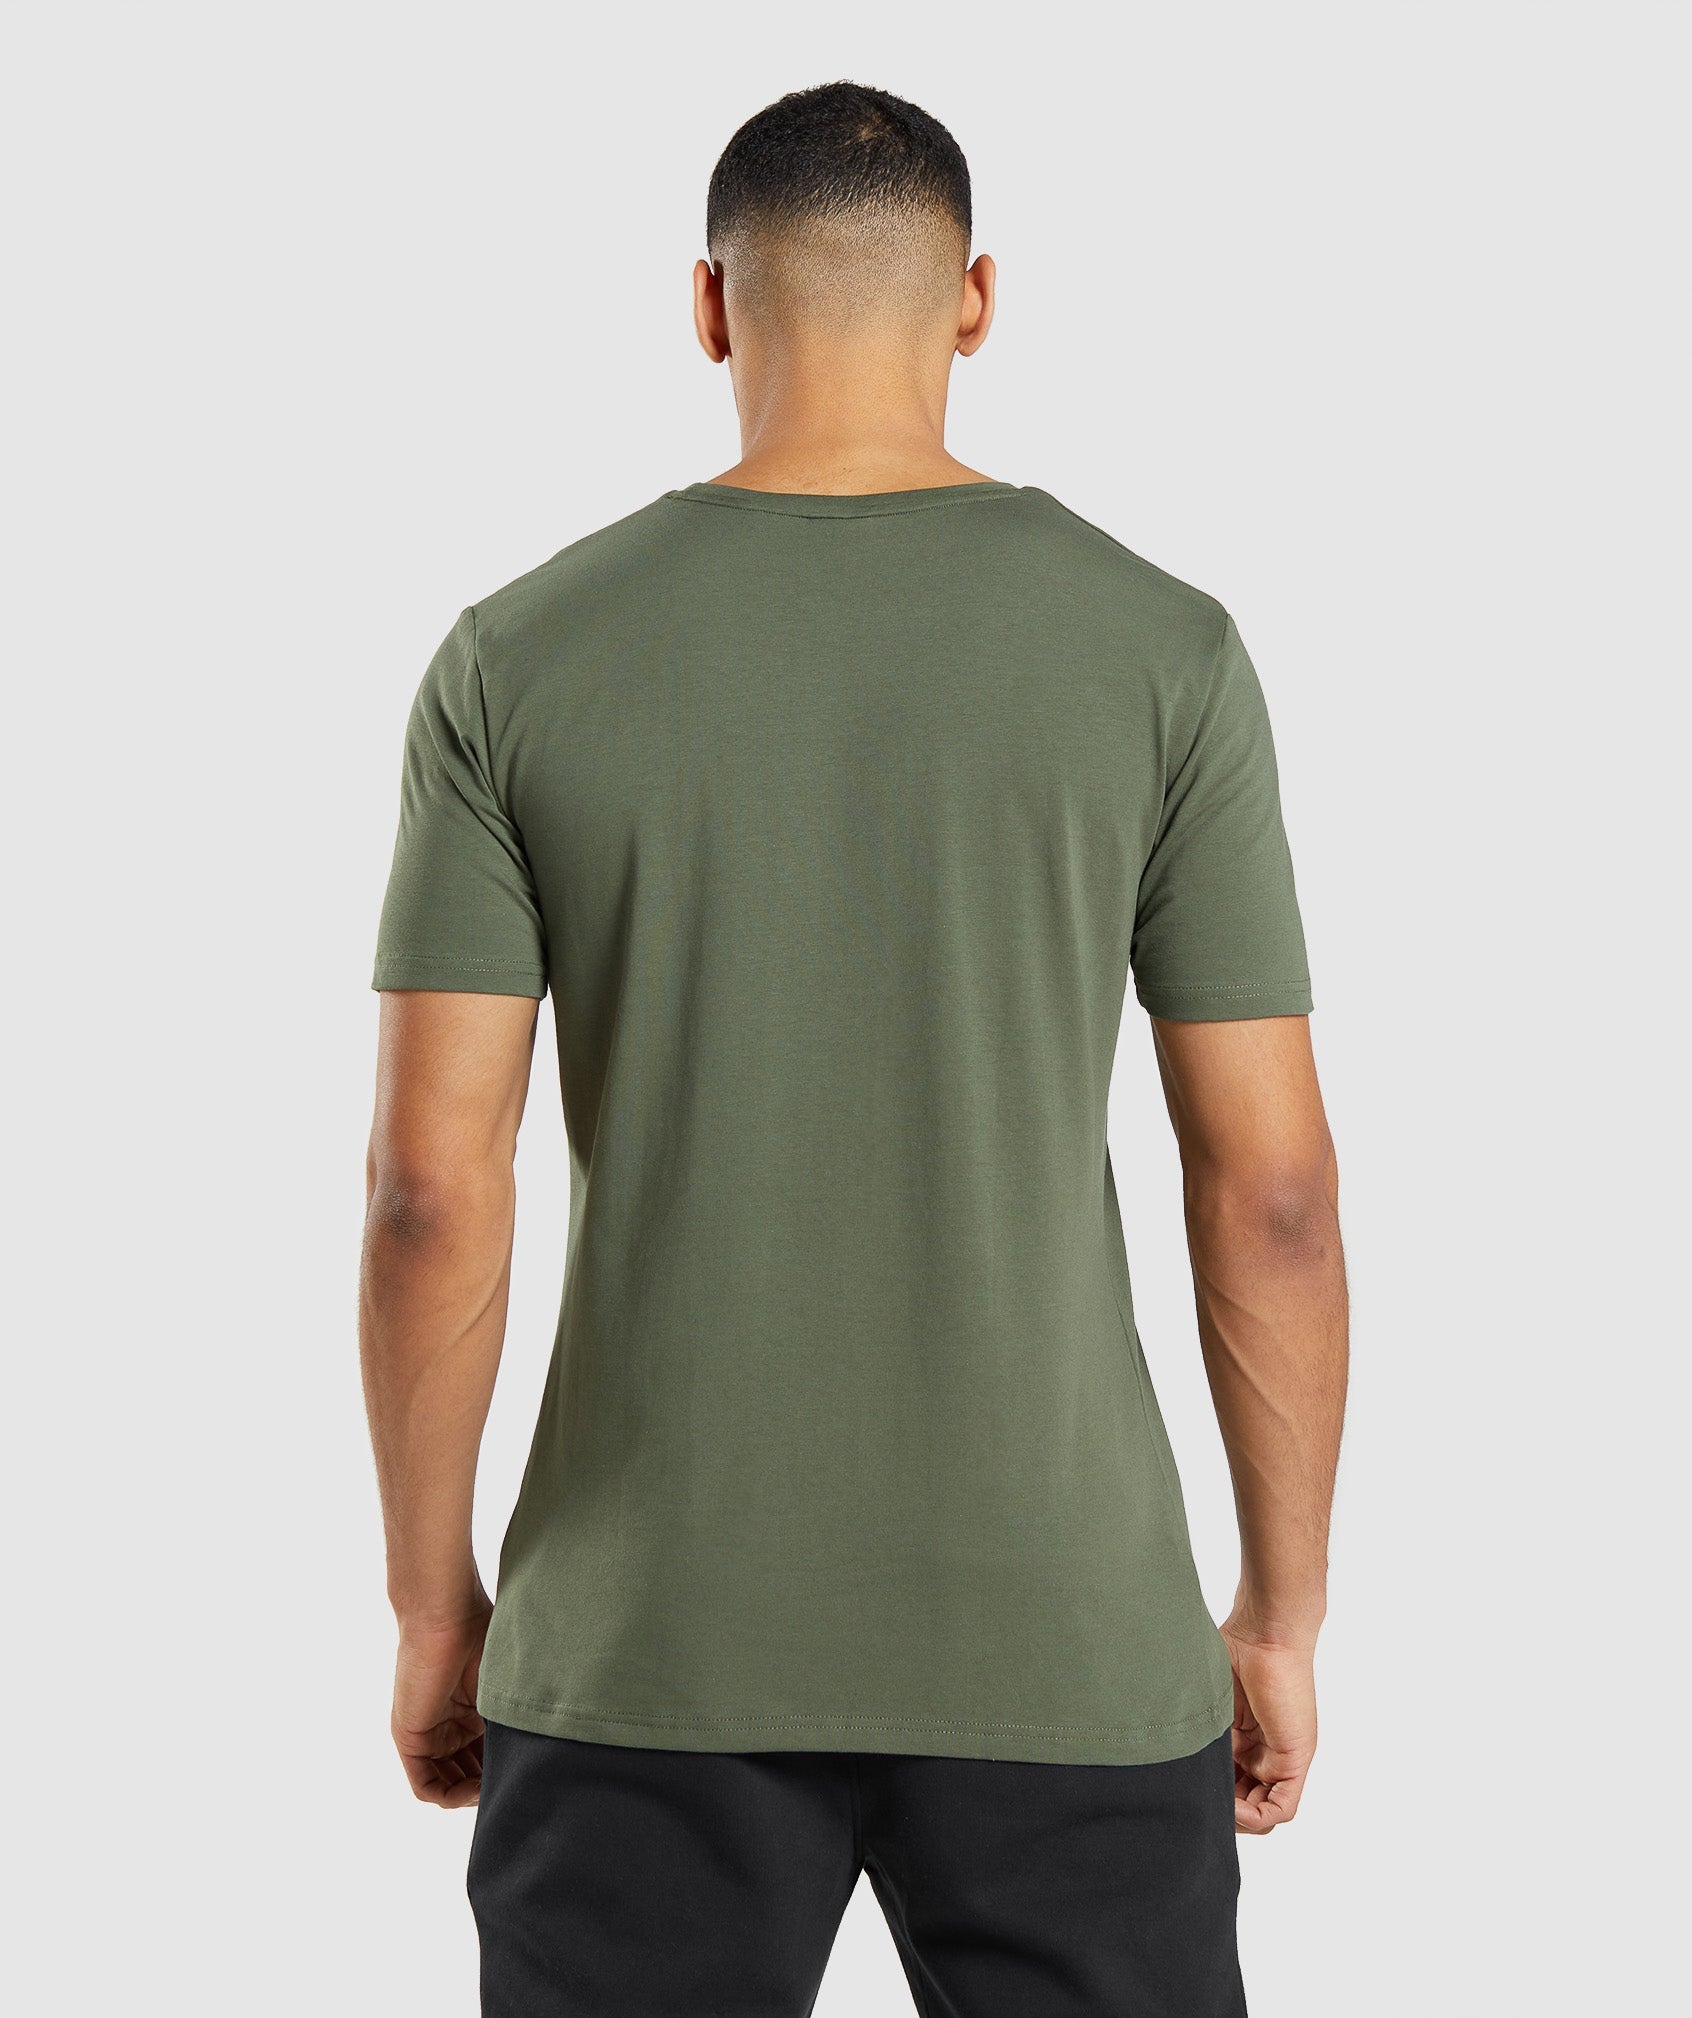 Essential T-Shirt in Core Olive - view 2